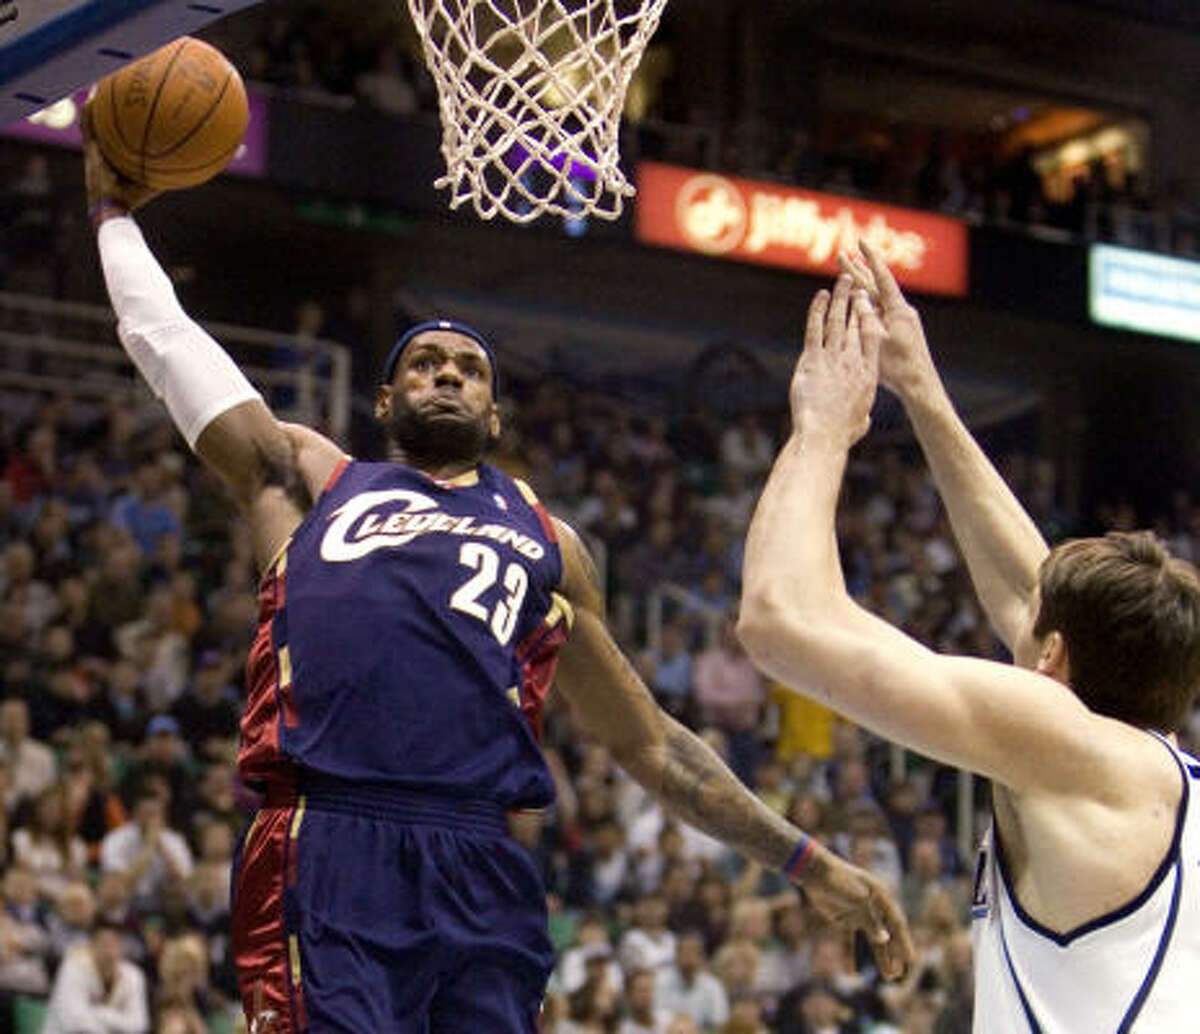 2008-09 LeBron James won his first MVP trophy after averaging 28.4 points, 7.2 assists and 7.6 rebounds in the regular season, but the Cavaliers were eliminated in the Eastern Conference finals by the Orlando Magic.